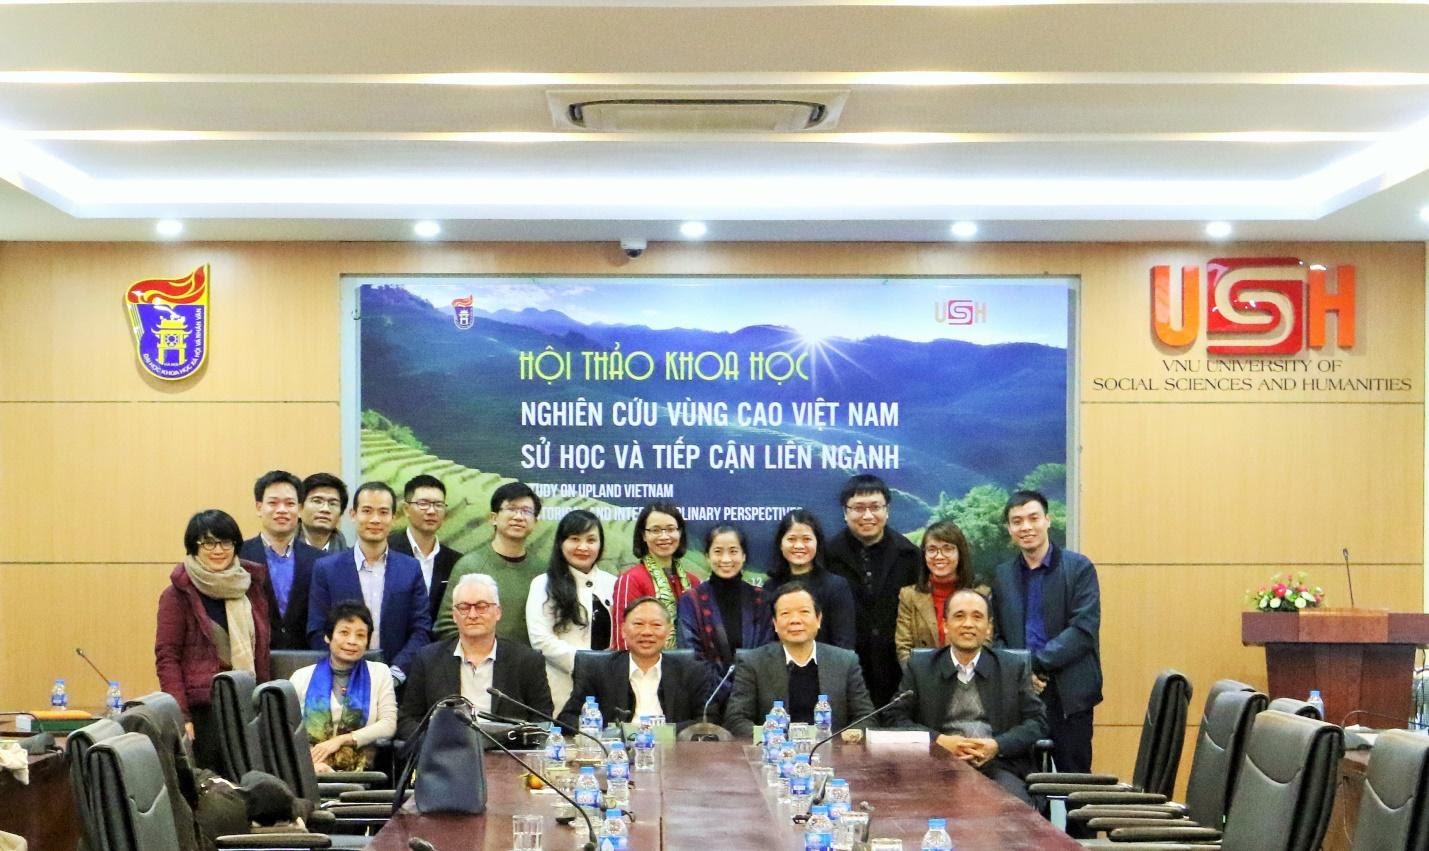 D:\Đỗ Thùy Lan\Working from Desktop Dell March 2019\2019\Seminar on Upland Sept 2019\For Conference 2020\Upland Symposium Dec 2020\Pics\Best\Best of the Bests\37.1.JPG